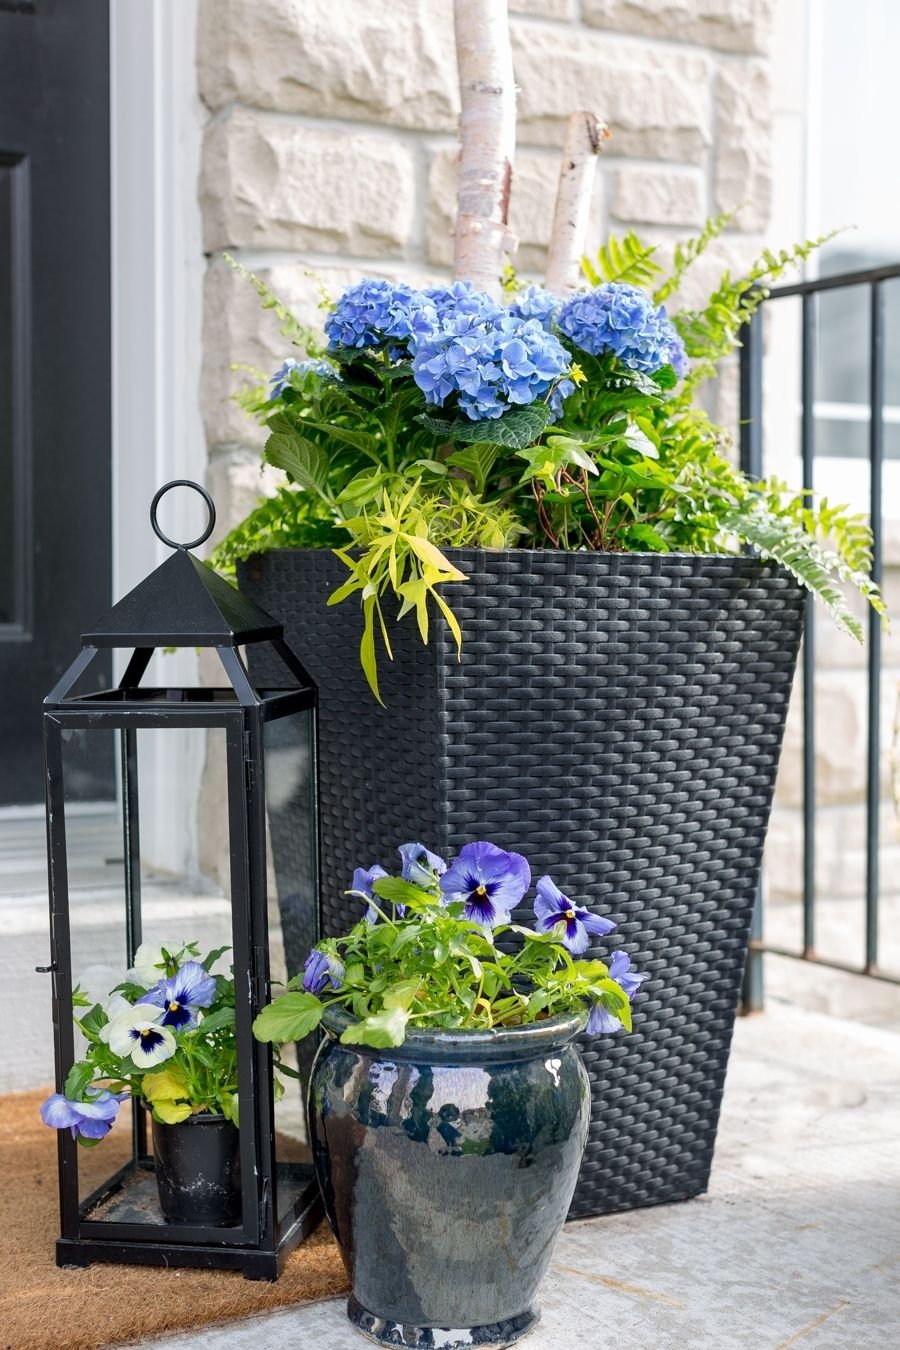 10 Amazing Front Porch Flower Pot Ideas porch planter ideas and inspiration outdoor spaces porch and planters 2023